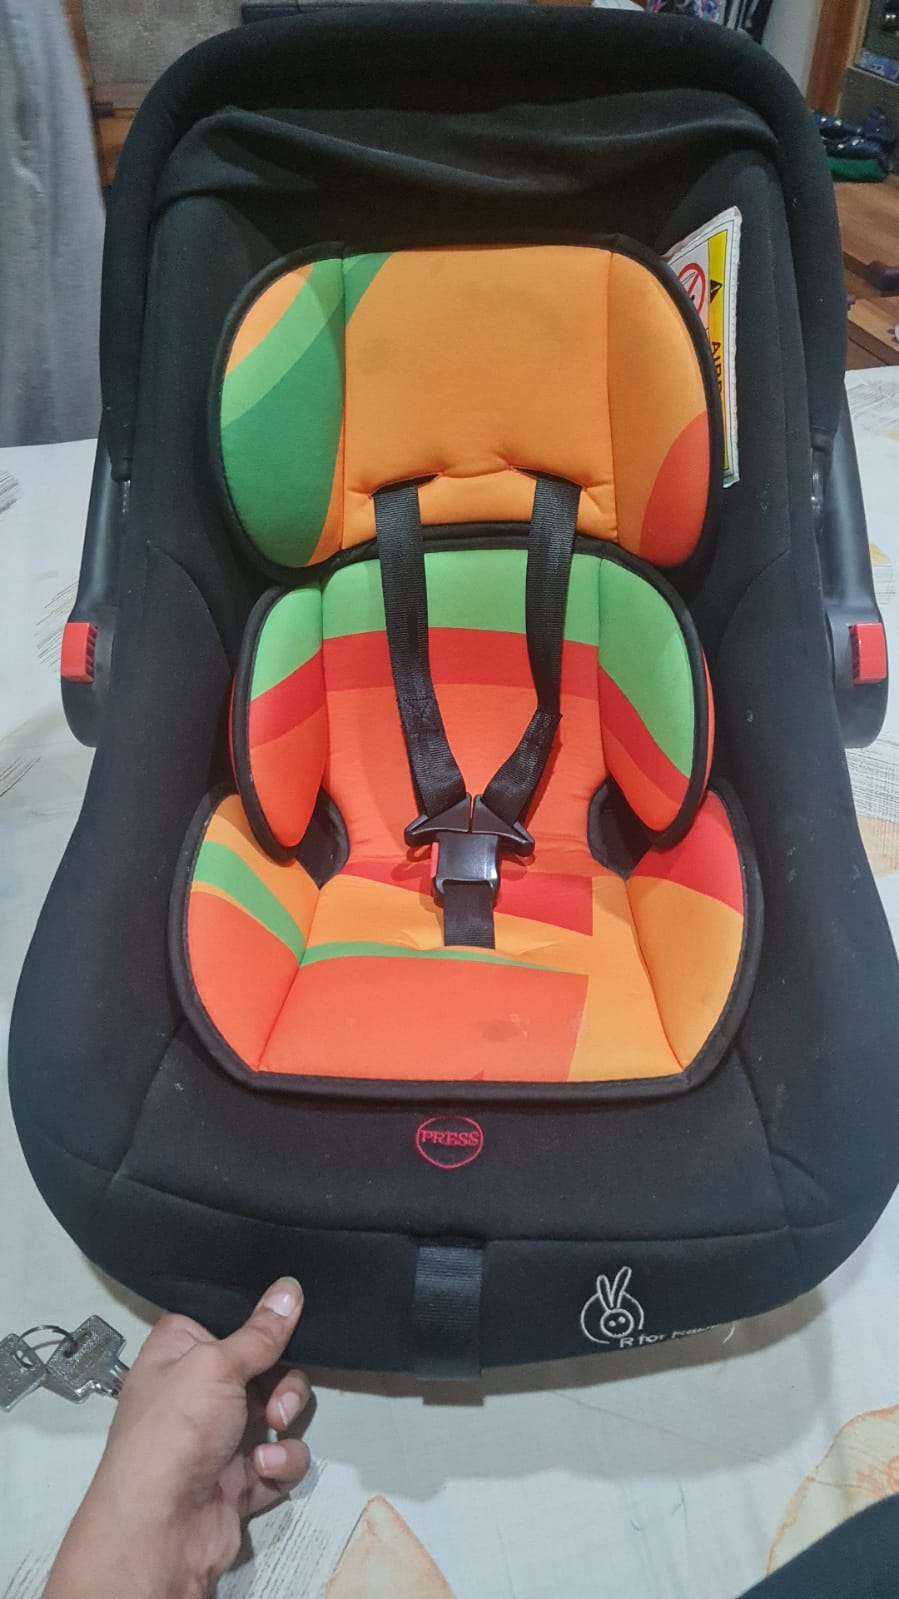 daleen beukes recommends cum on car seat pic